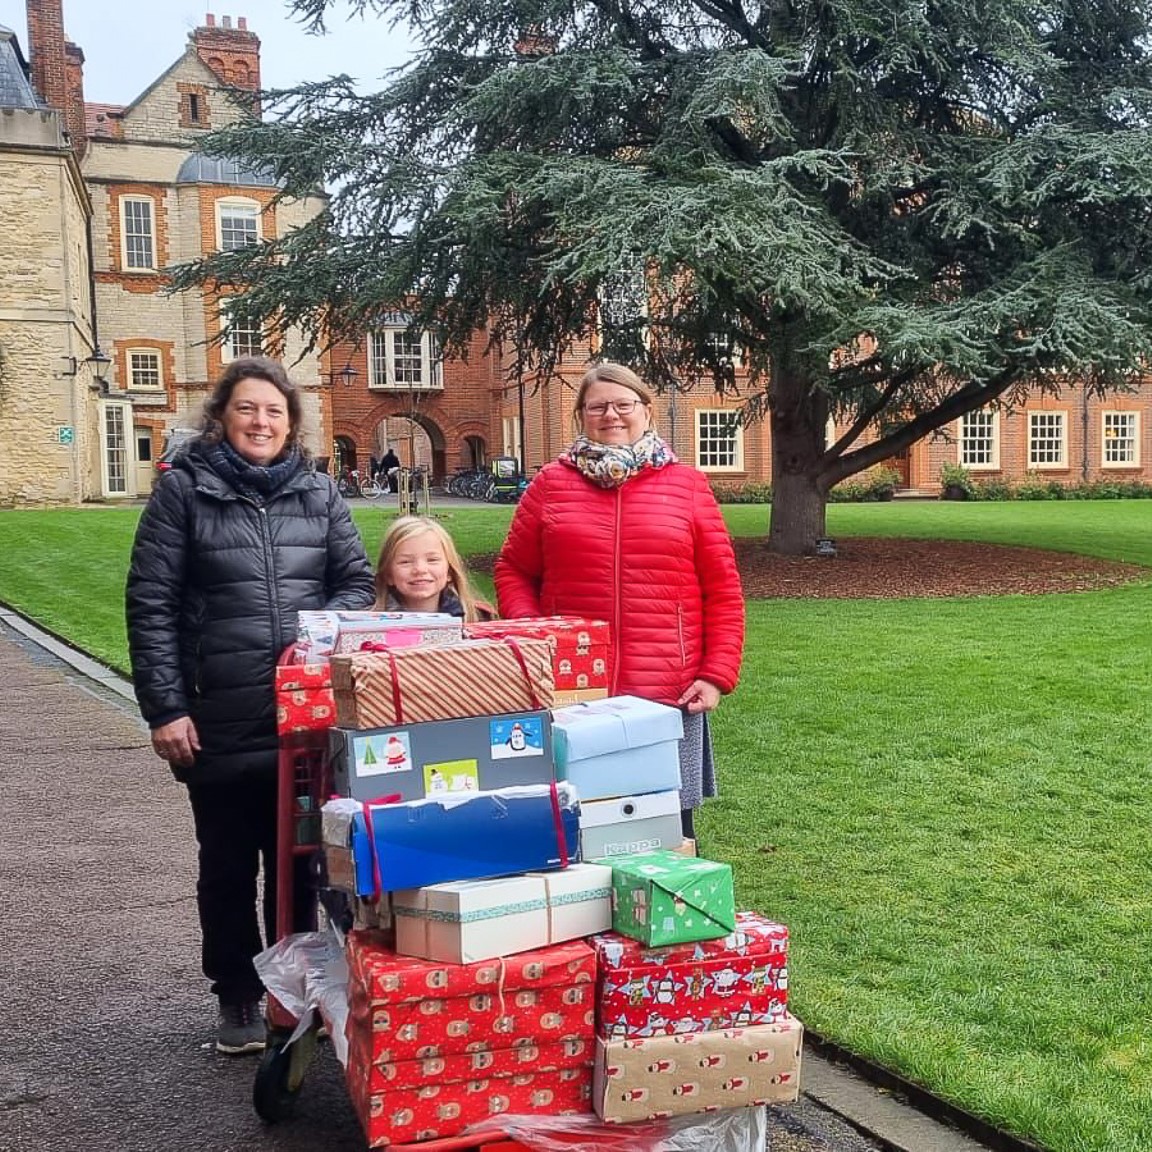 Our Janet Vaughan Tutor in Clinical Medicine, Dr Helen Ashdown (right), led college efforts to send shoeboxes of helpful goods and luxuries to healthcare workers in Ukraine.